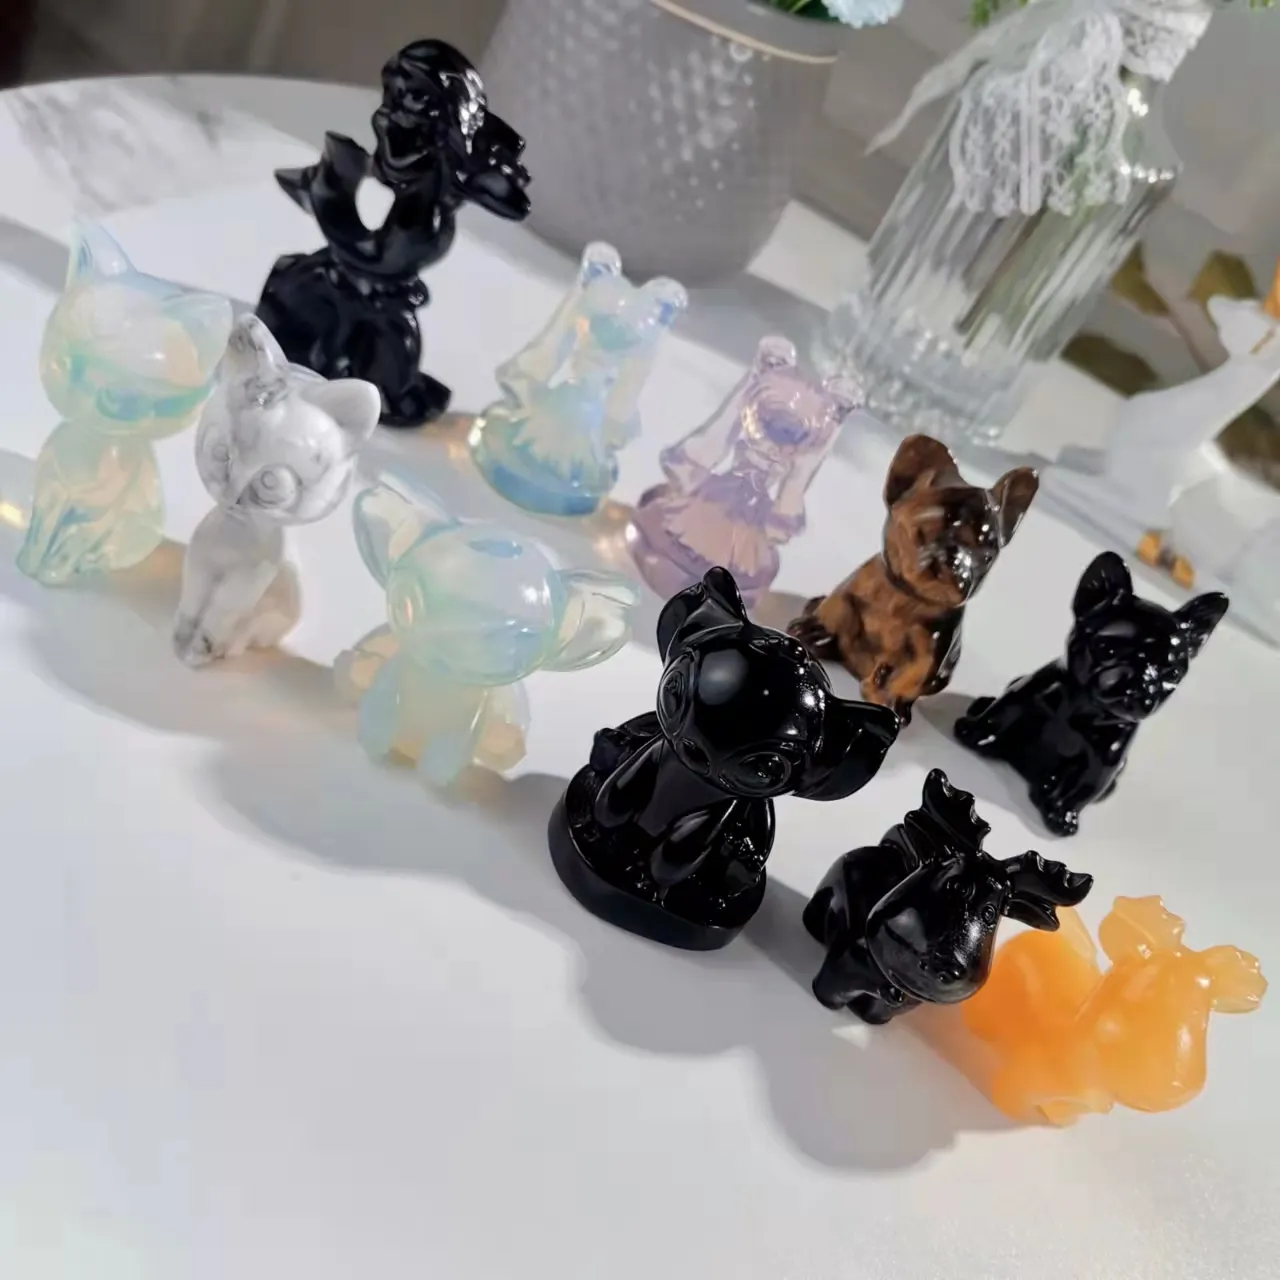 Bulk Wholesale Crystal Craving Stitch Cut French Bulldog Hand Carved Crystal Animal Carvings Craft